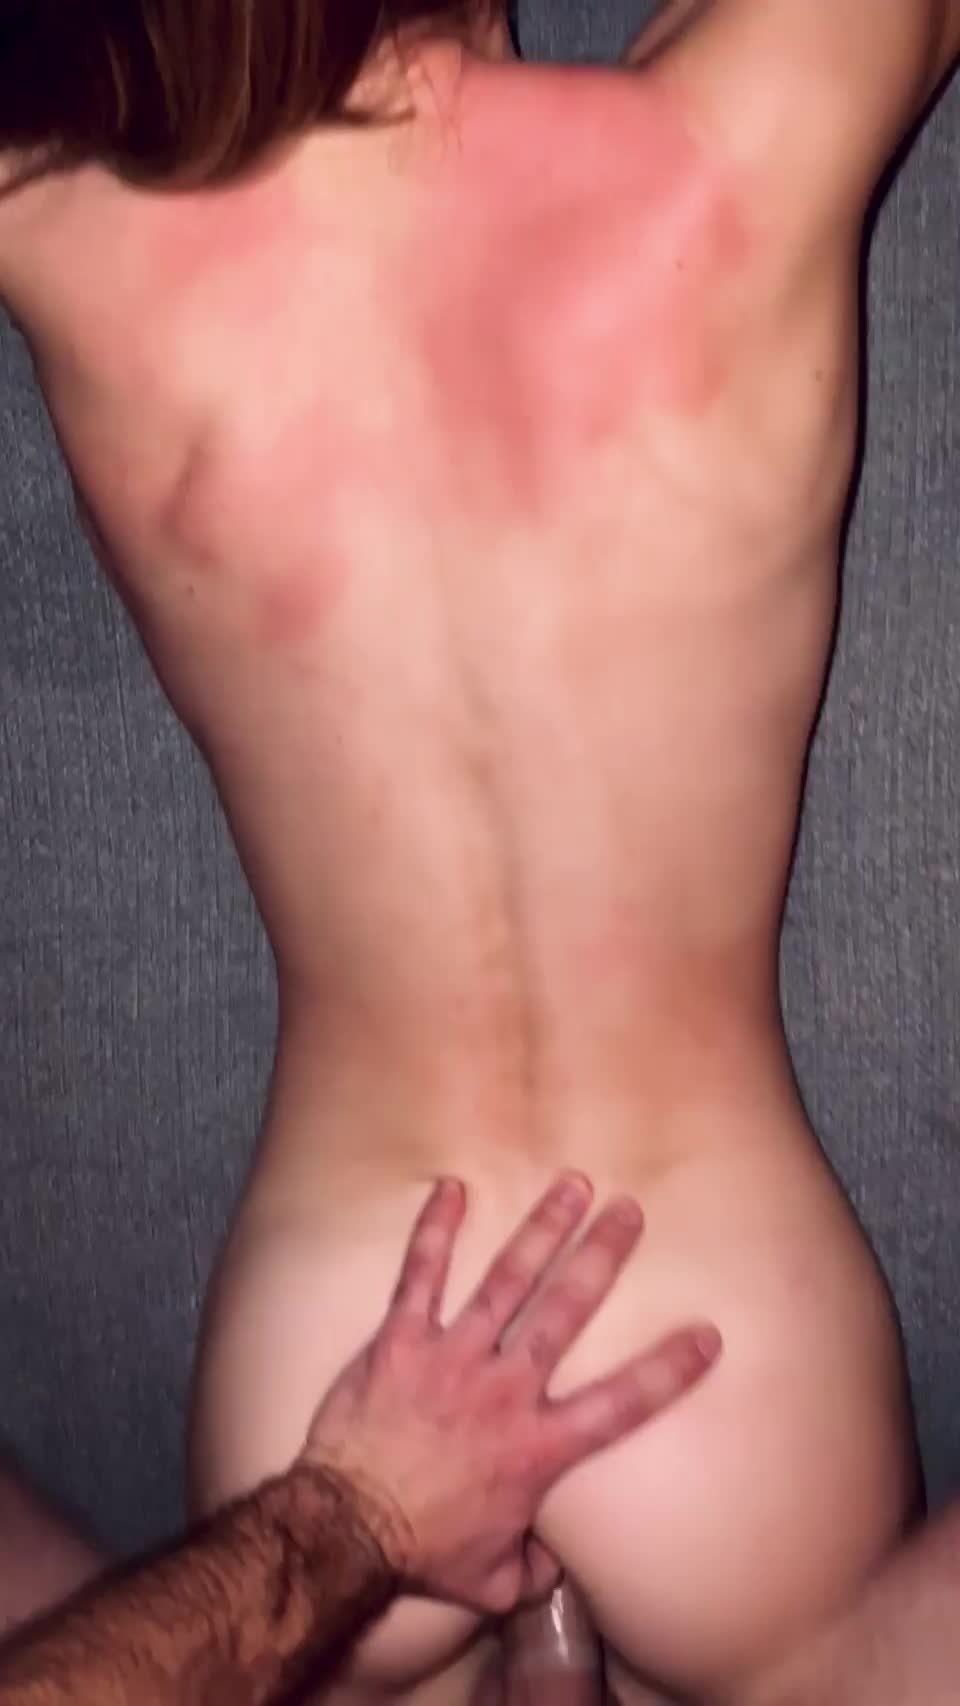 All the red is bite-marks. Happy Monday everybody. : video clip